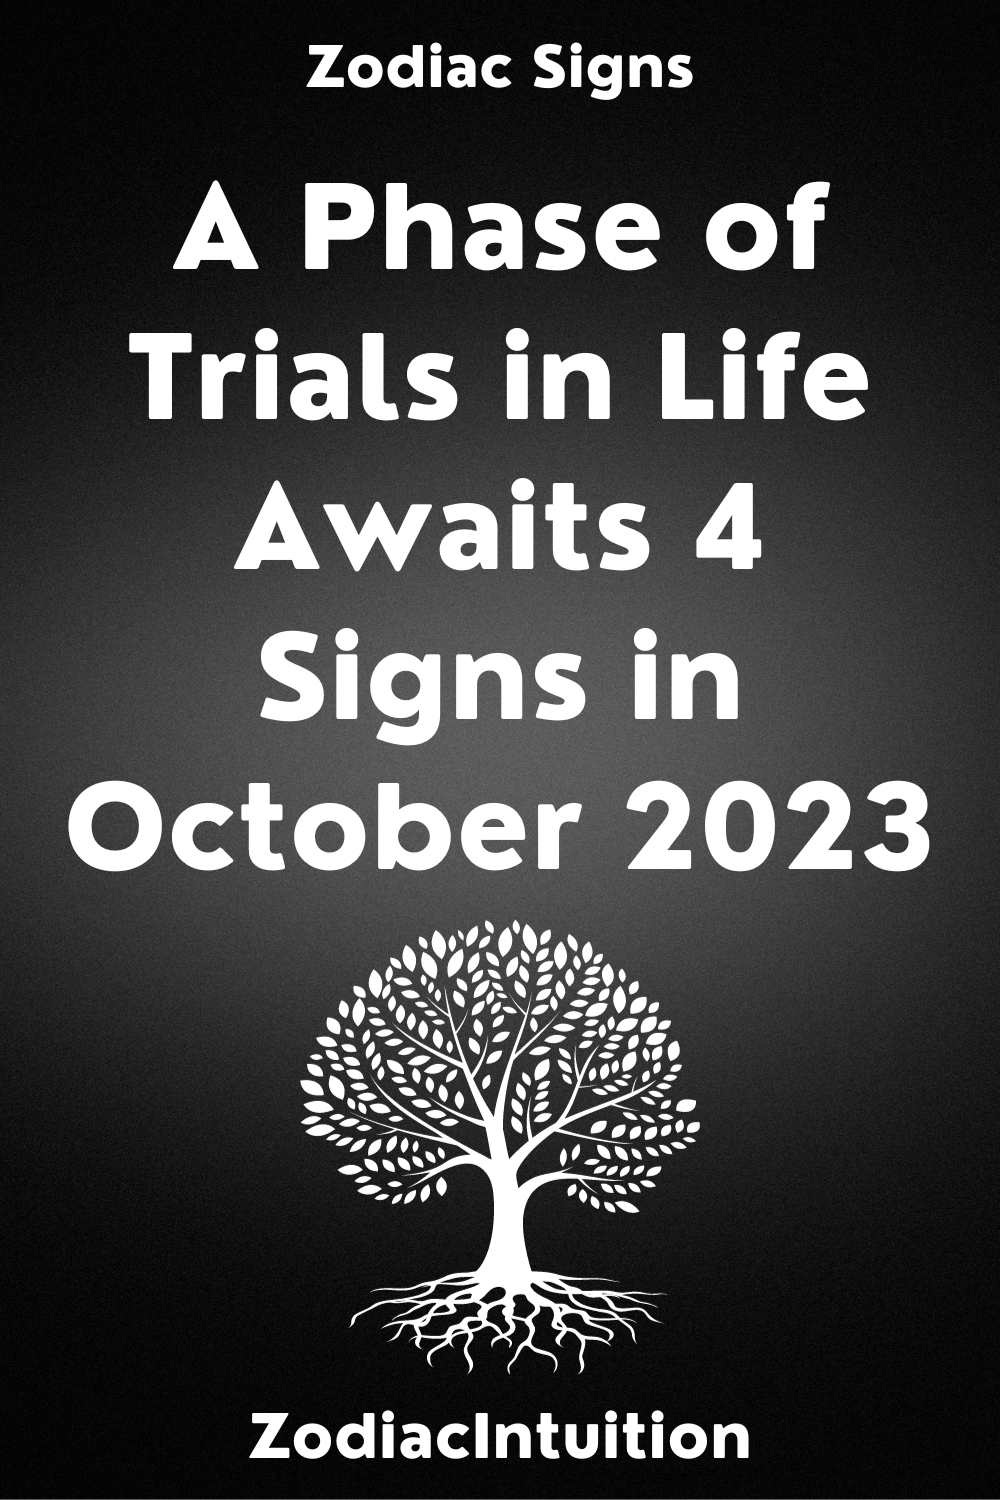 A Phase of Trials in Life Awaits 4 Signs in October 2023